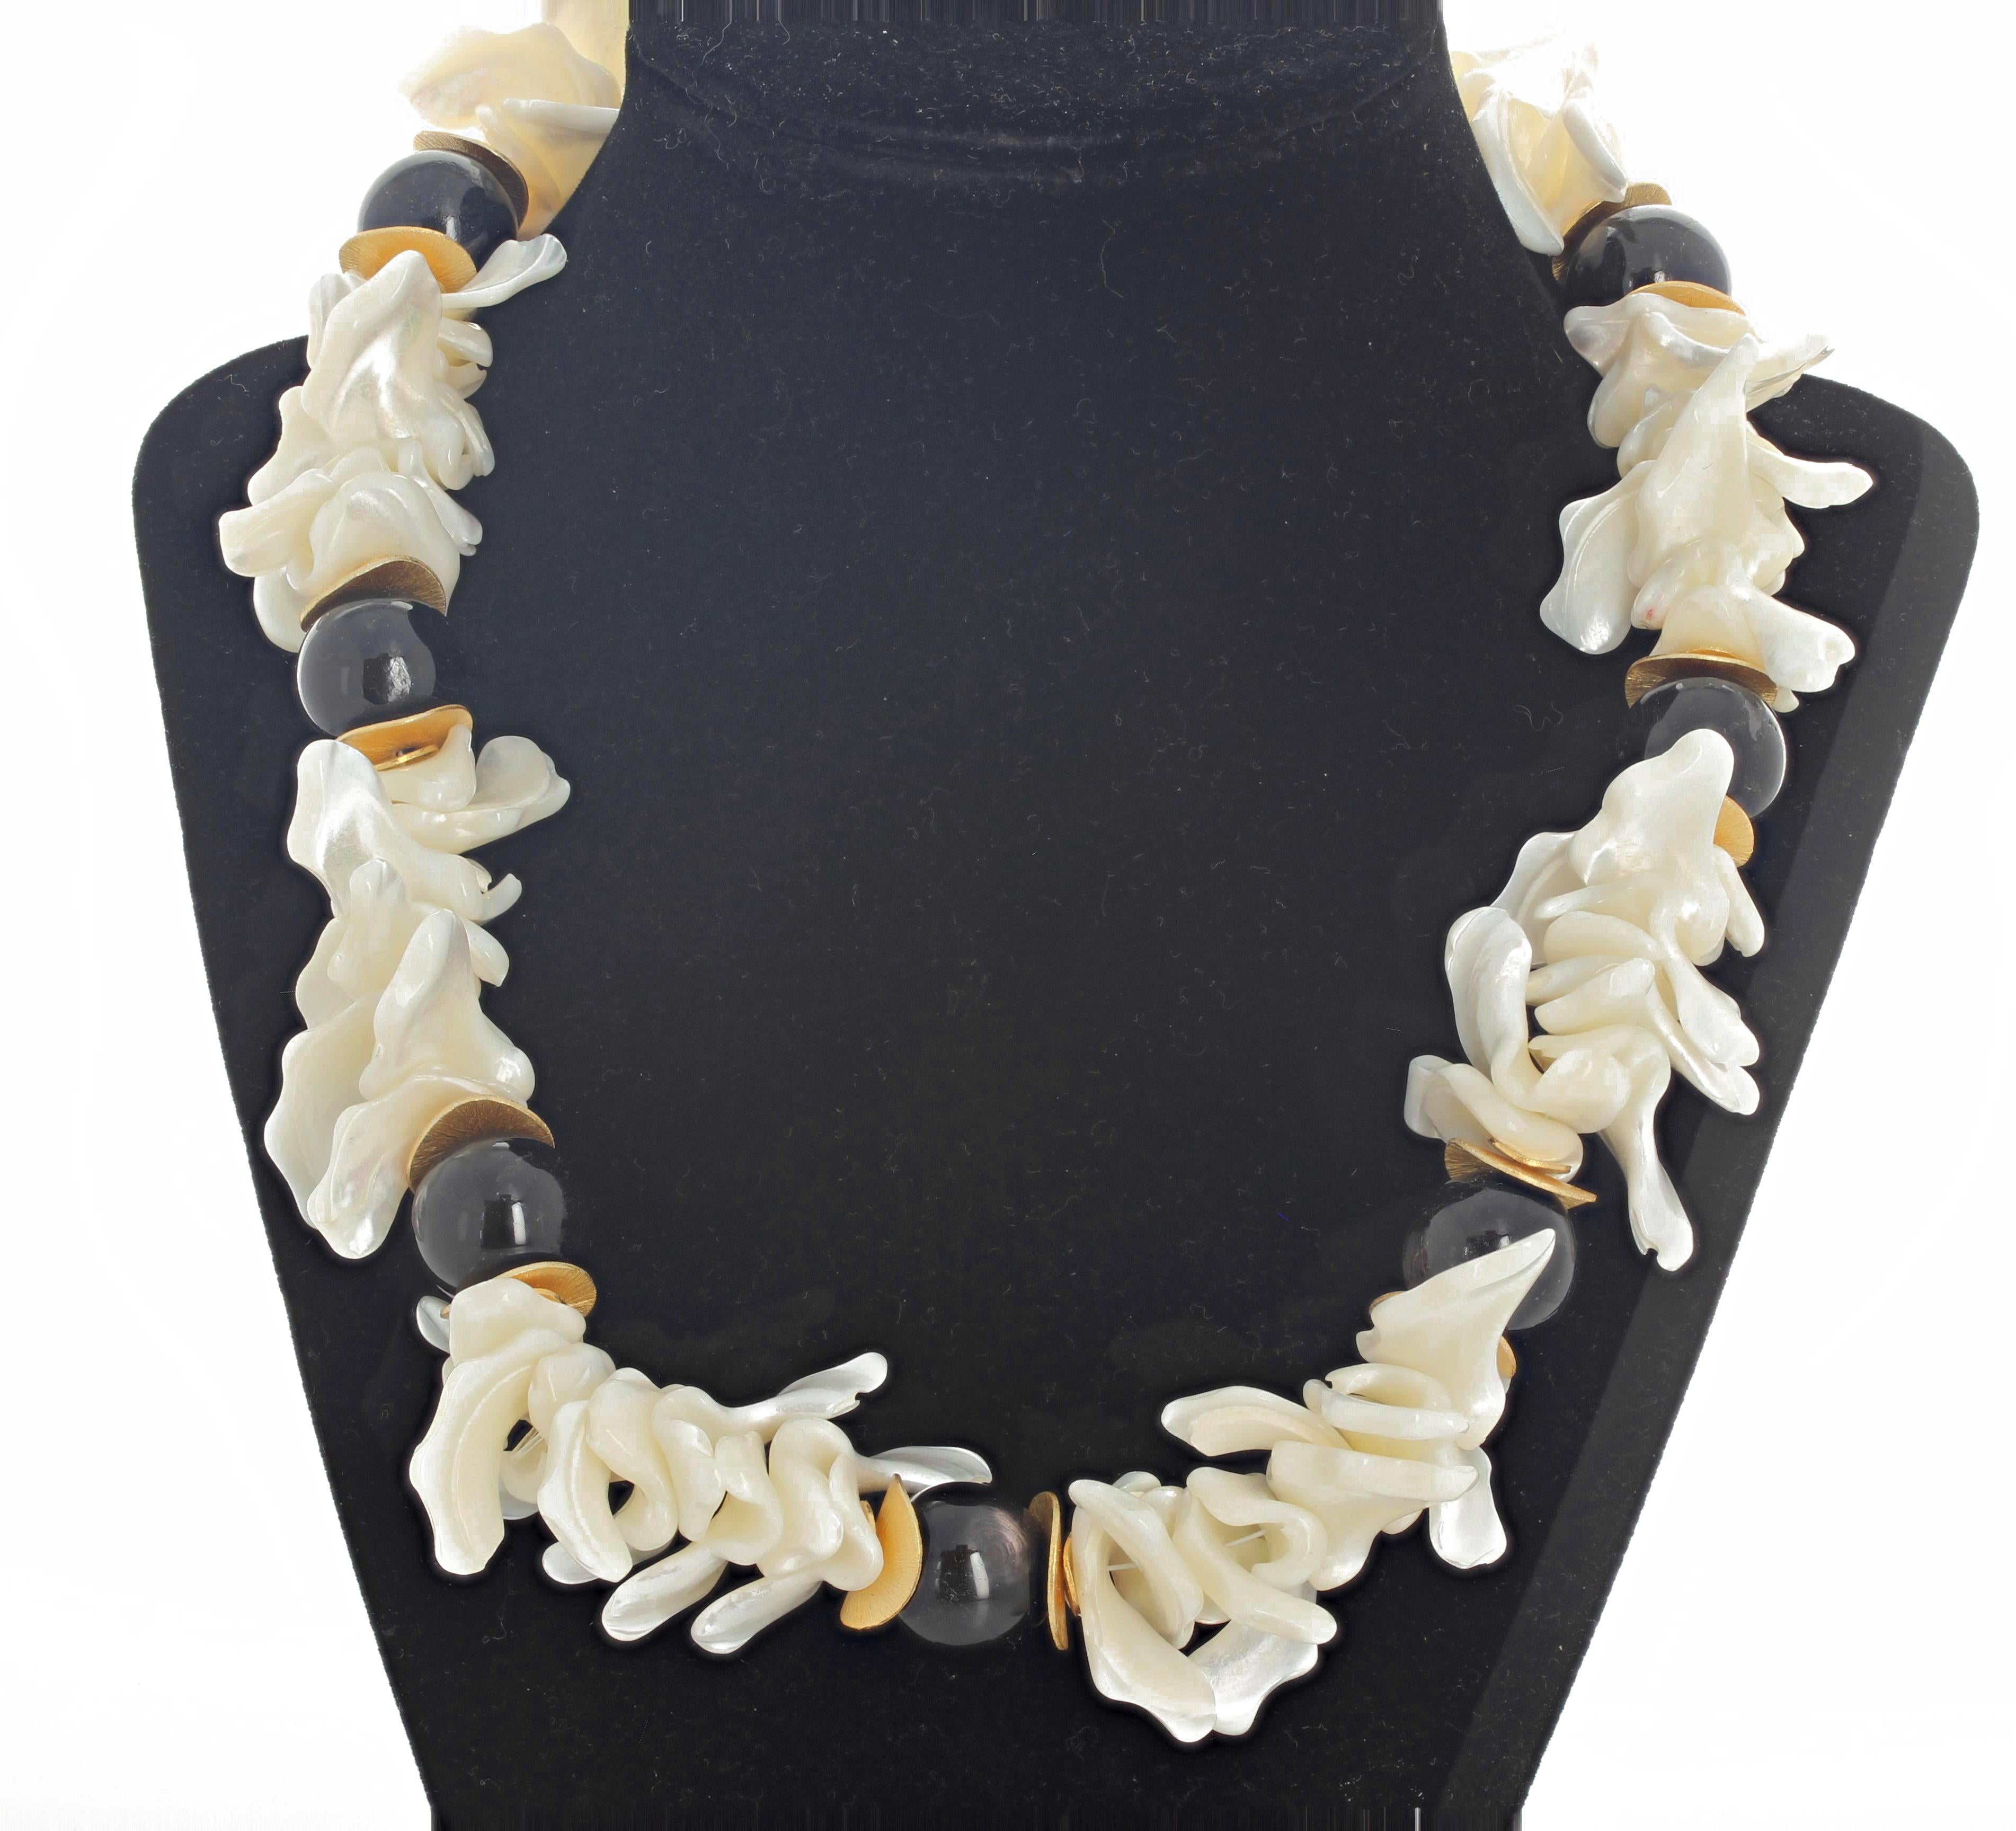 Dramatic flakes and petals of white Pearl Shells adorned with large round (15 mm) glowing Chocolate Moonstones enhanced with gold plated rondels set in a 19.5 inch long handmade necklace with gold tone clasp.  The edges of the shells are